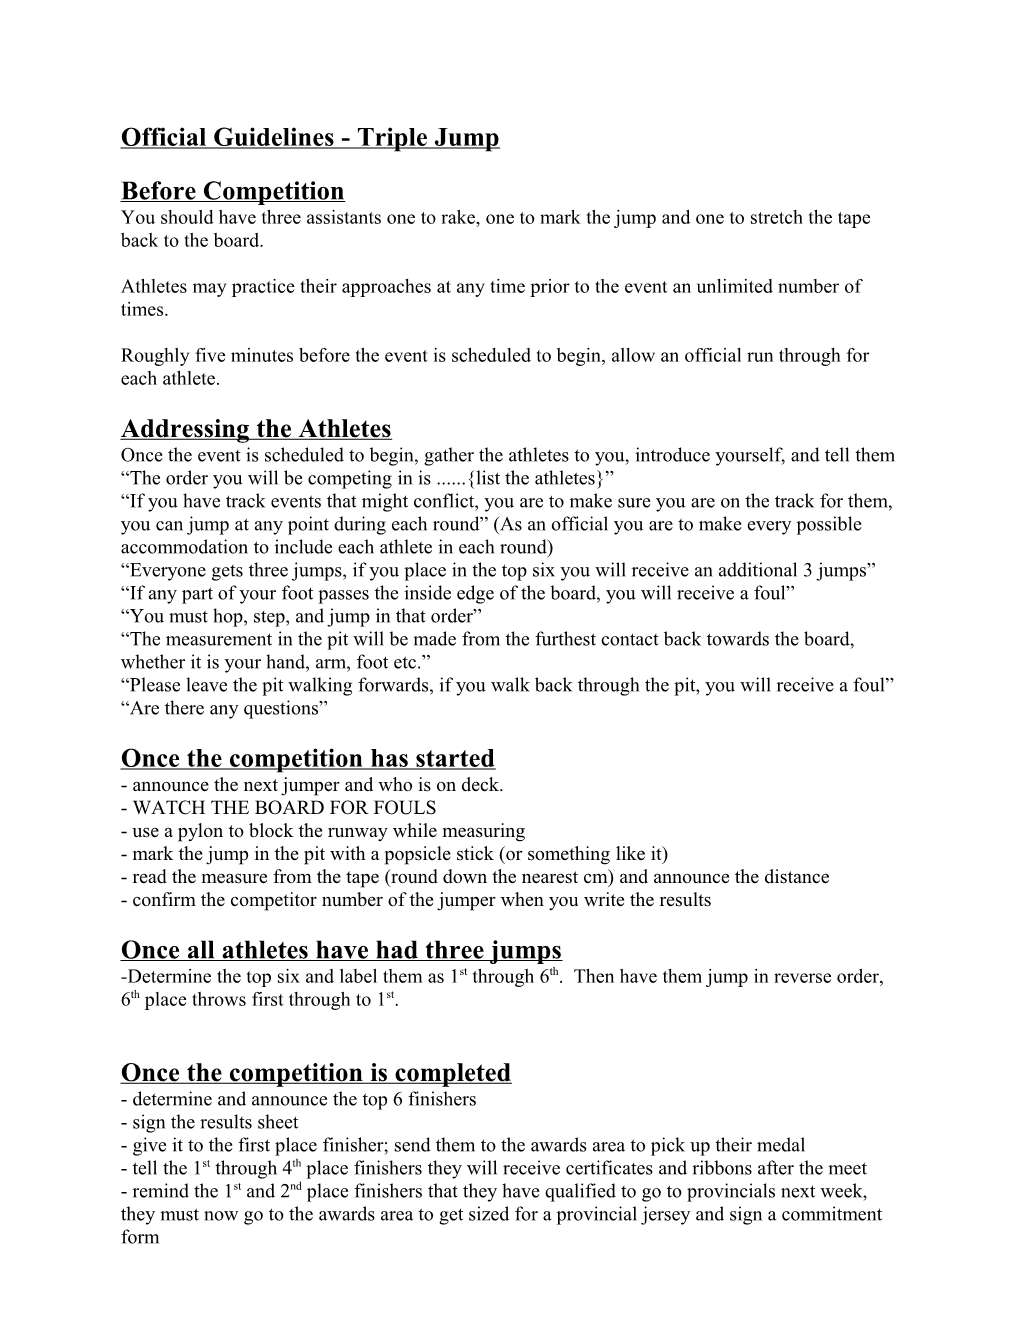 Official Guidelines - Triple Jump